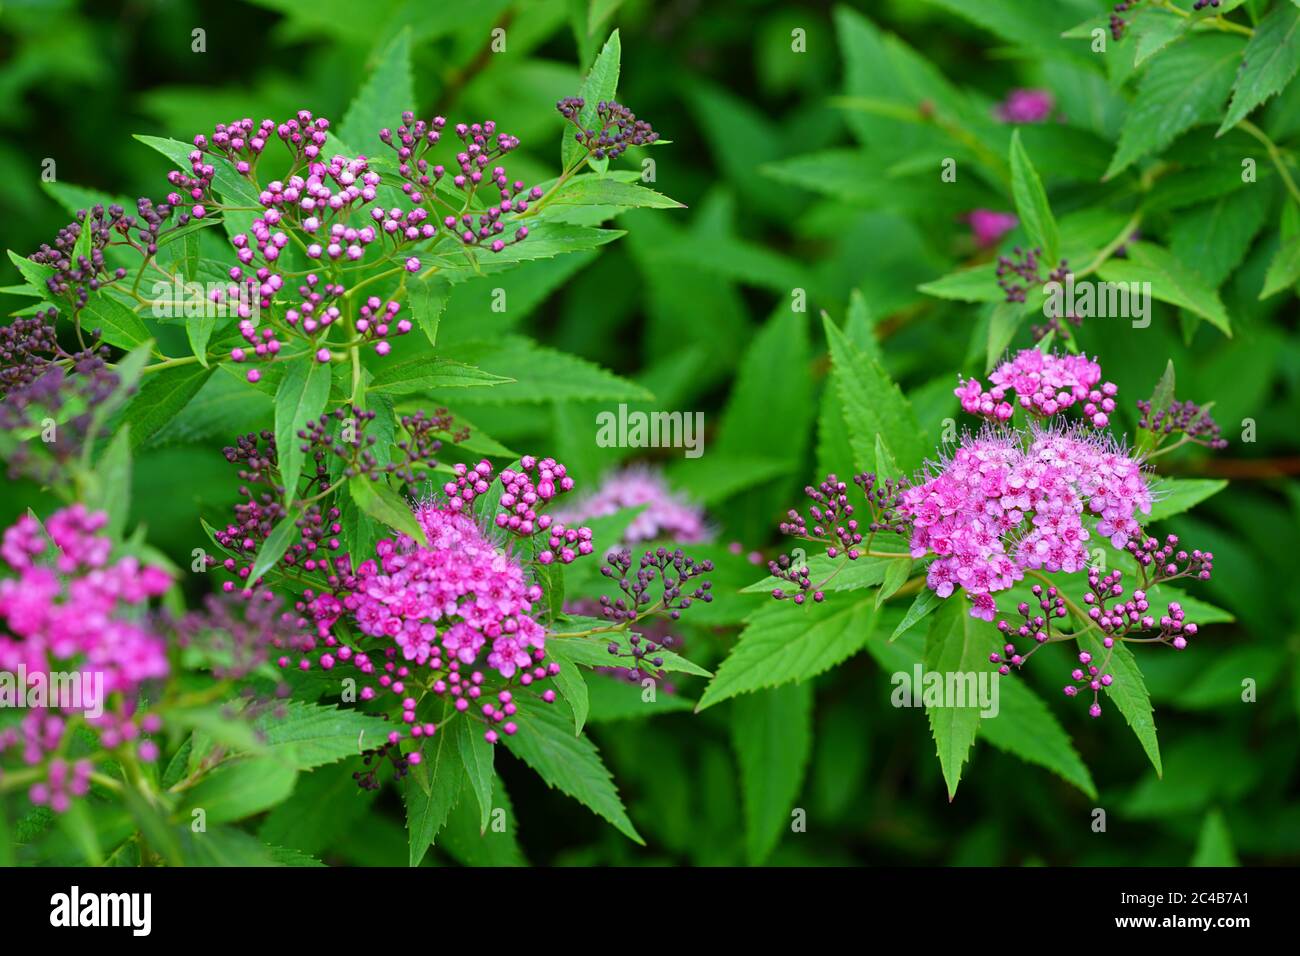 Pink flowers of spirea plant Stock Photo